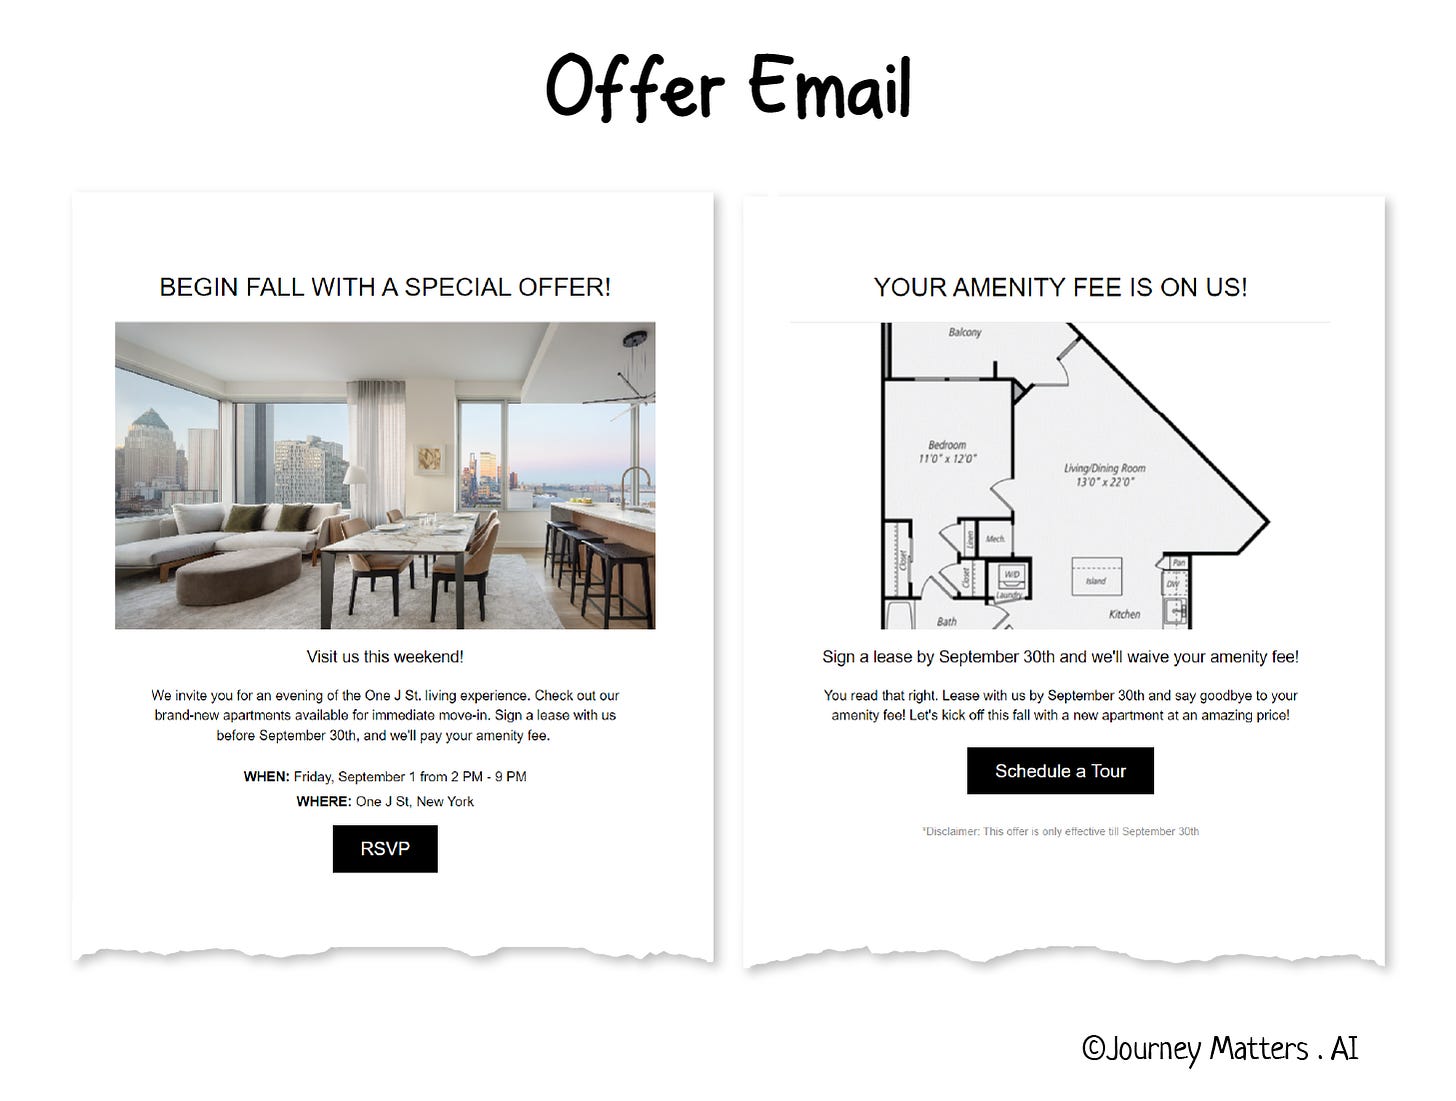 An offer email to waive off the amenity fee